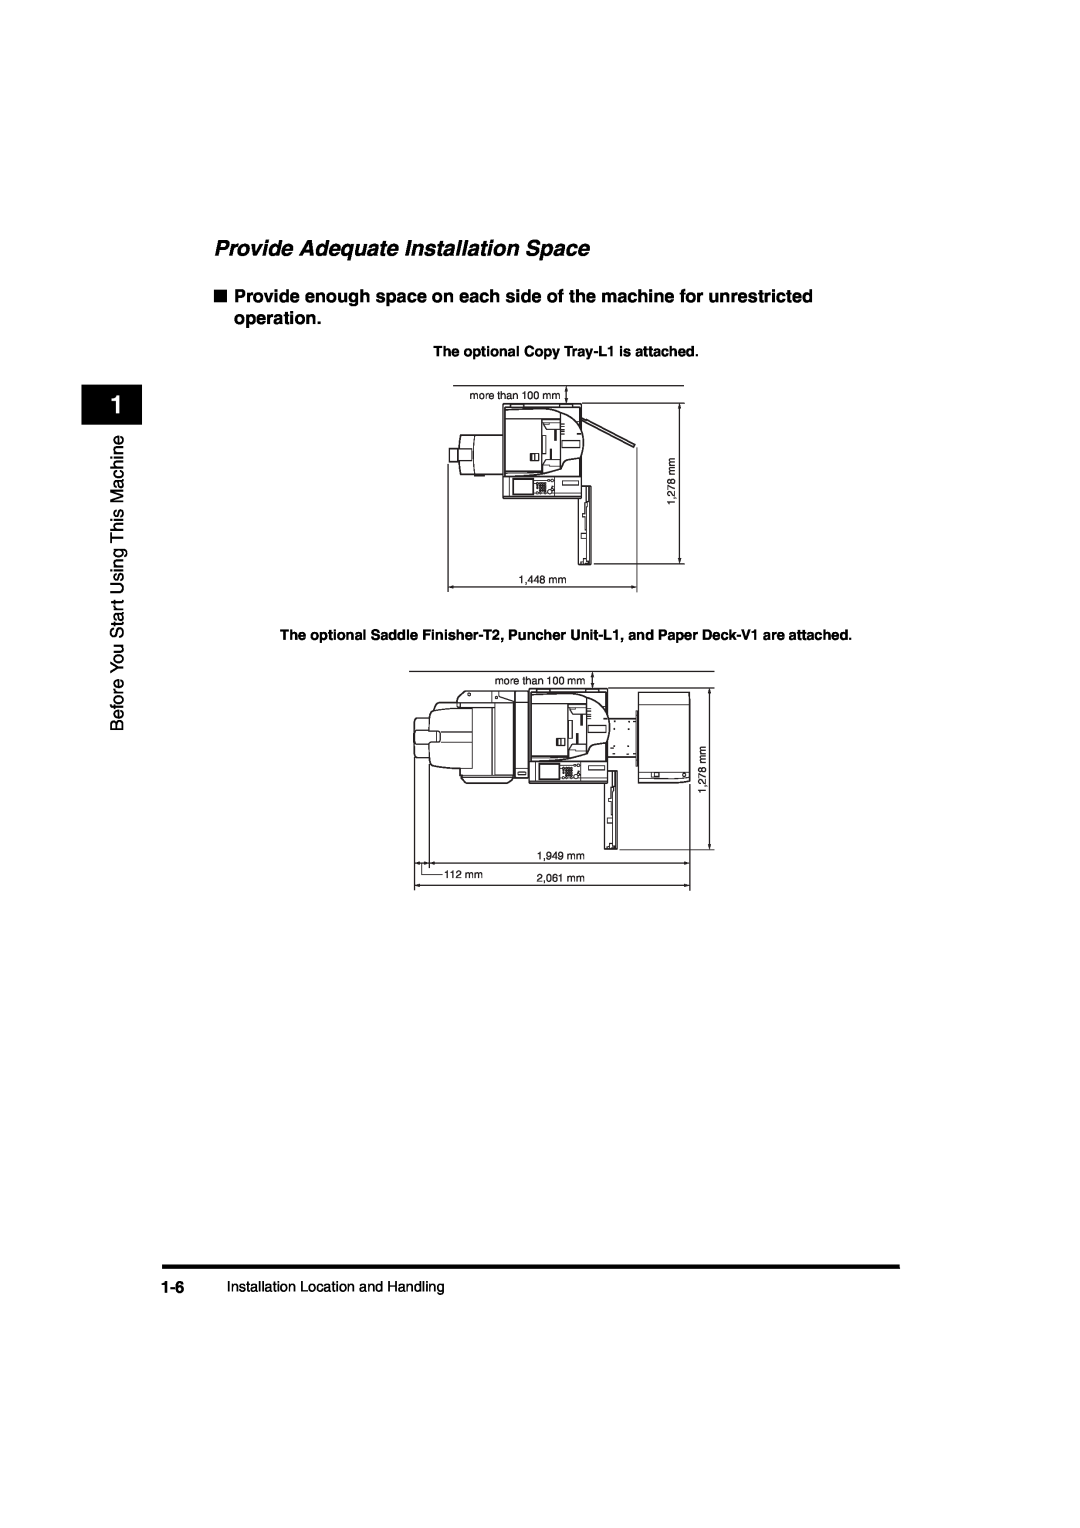 Canon iR6570 manual Provide Adequate Installation Space, The optional Copy Tray-L1 is attached 